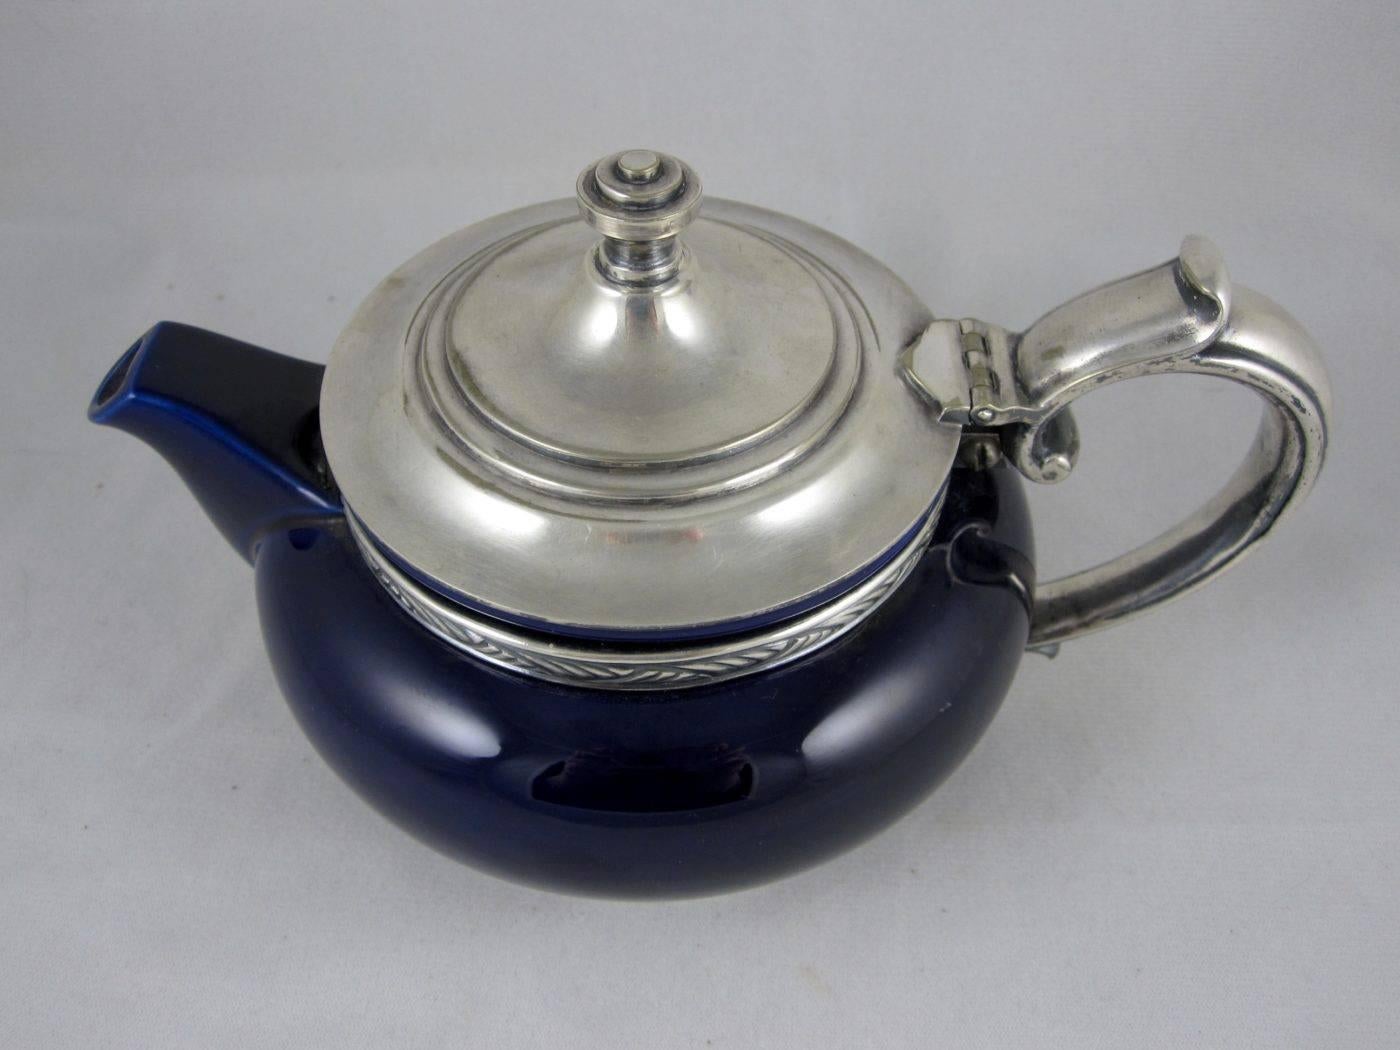 reed and barton silver soldered teapot